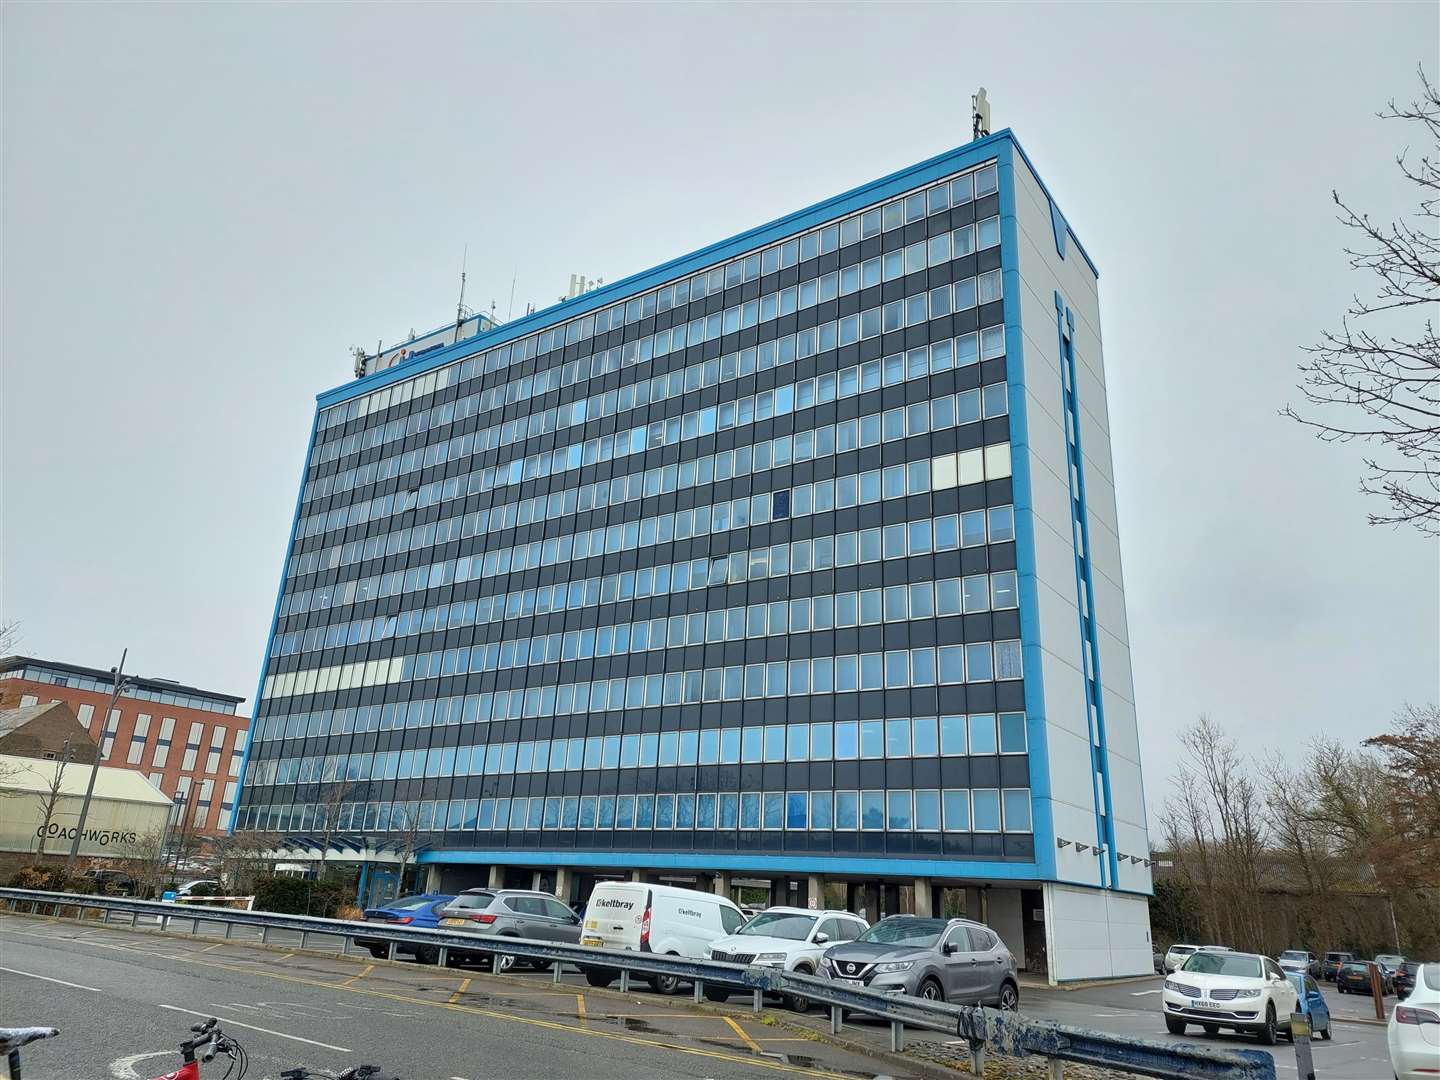 Ashford Borough Council is to consider relocating its headquarters to International House, Ashford